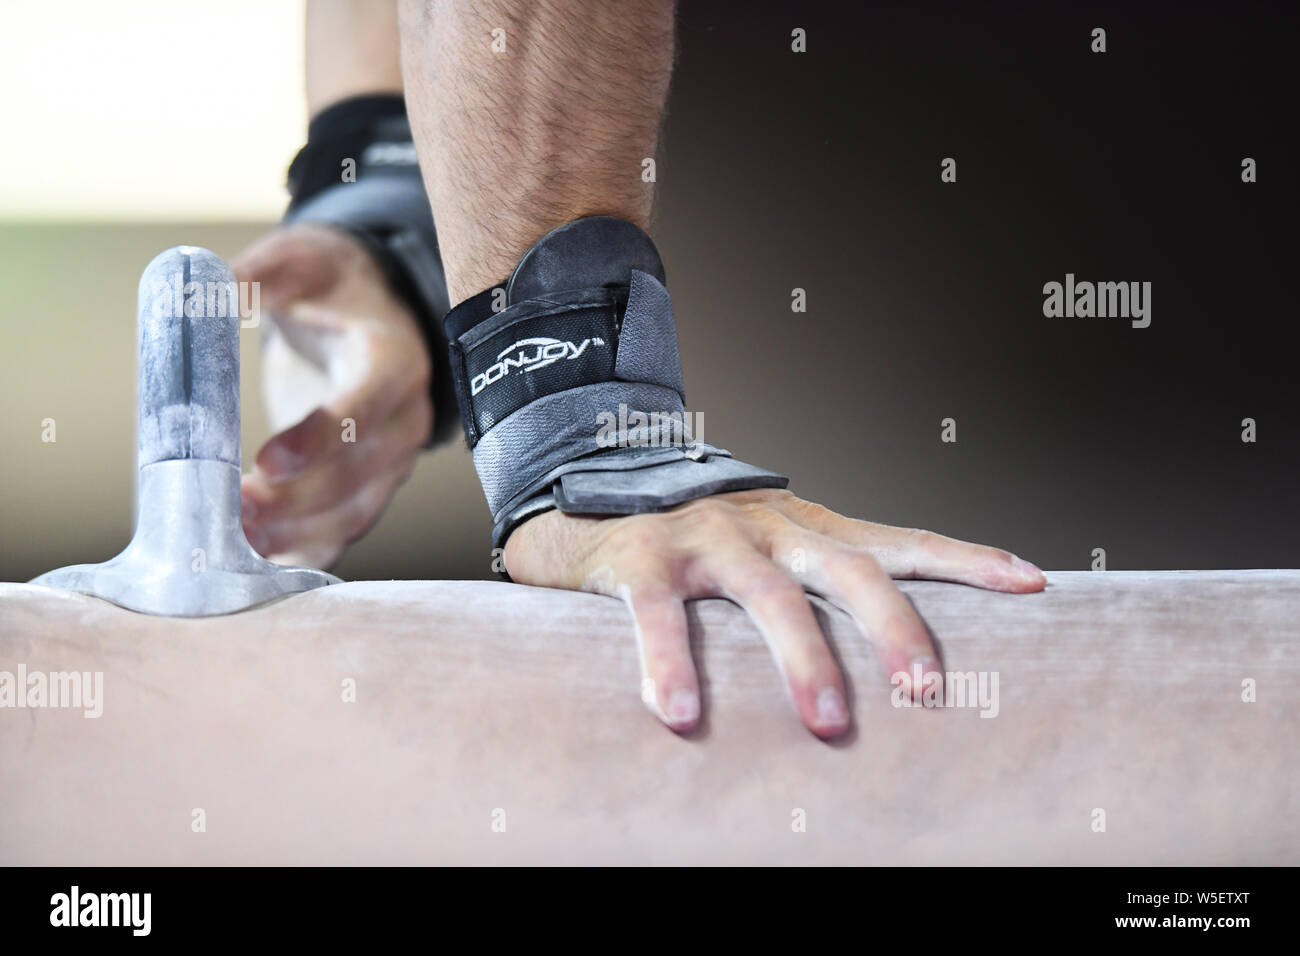 Lima, Peru. 28th July, 2019. A gymnast warms up on the pommel horse during the team finals competition held in the Polideportivo Villa El Salvador in Lima, Peru. Credit: Amy Sanderson/ZUMA Wire/Alamy Live News Stock Photo